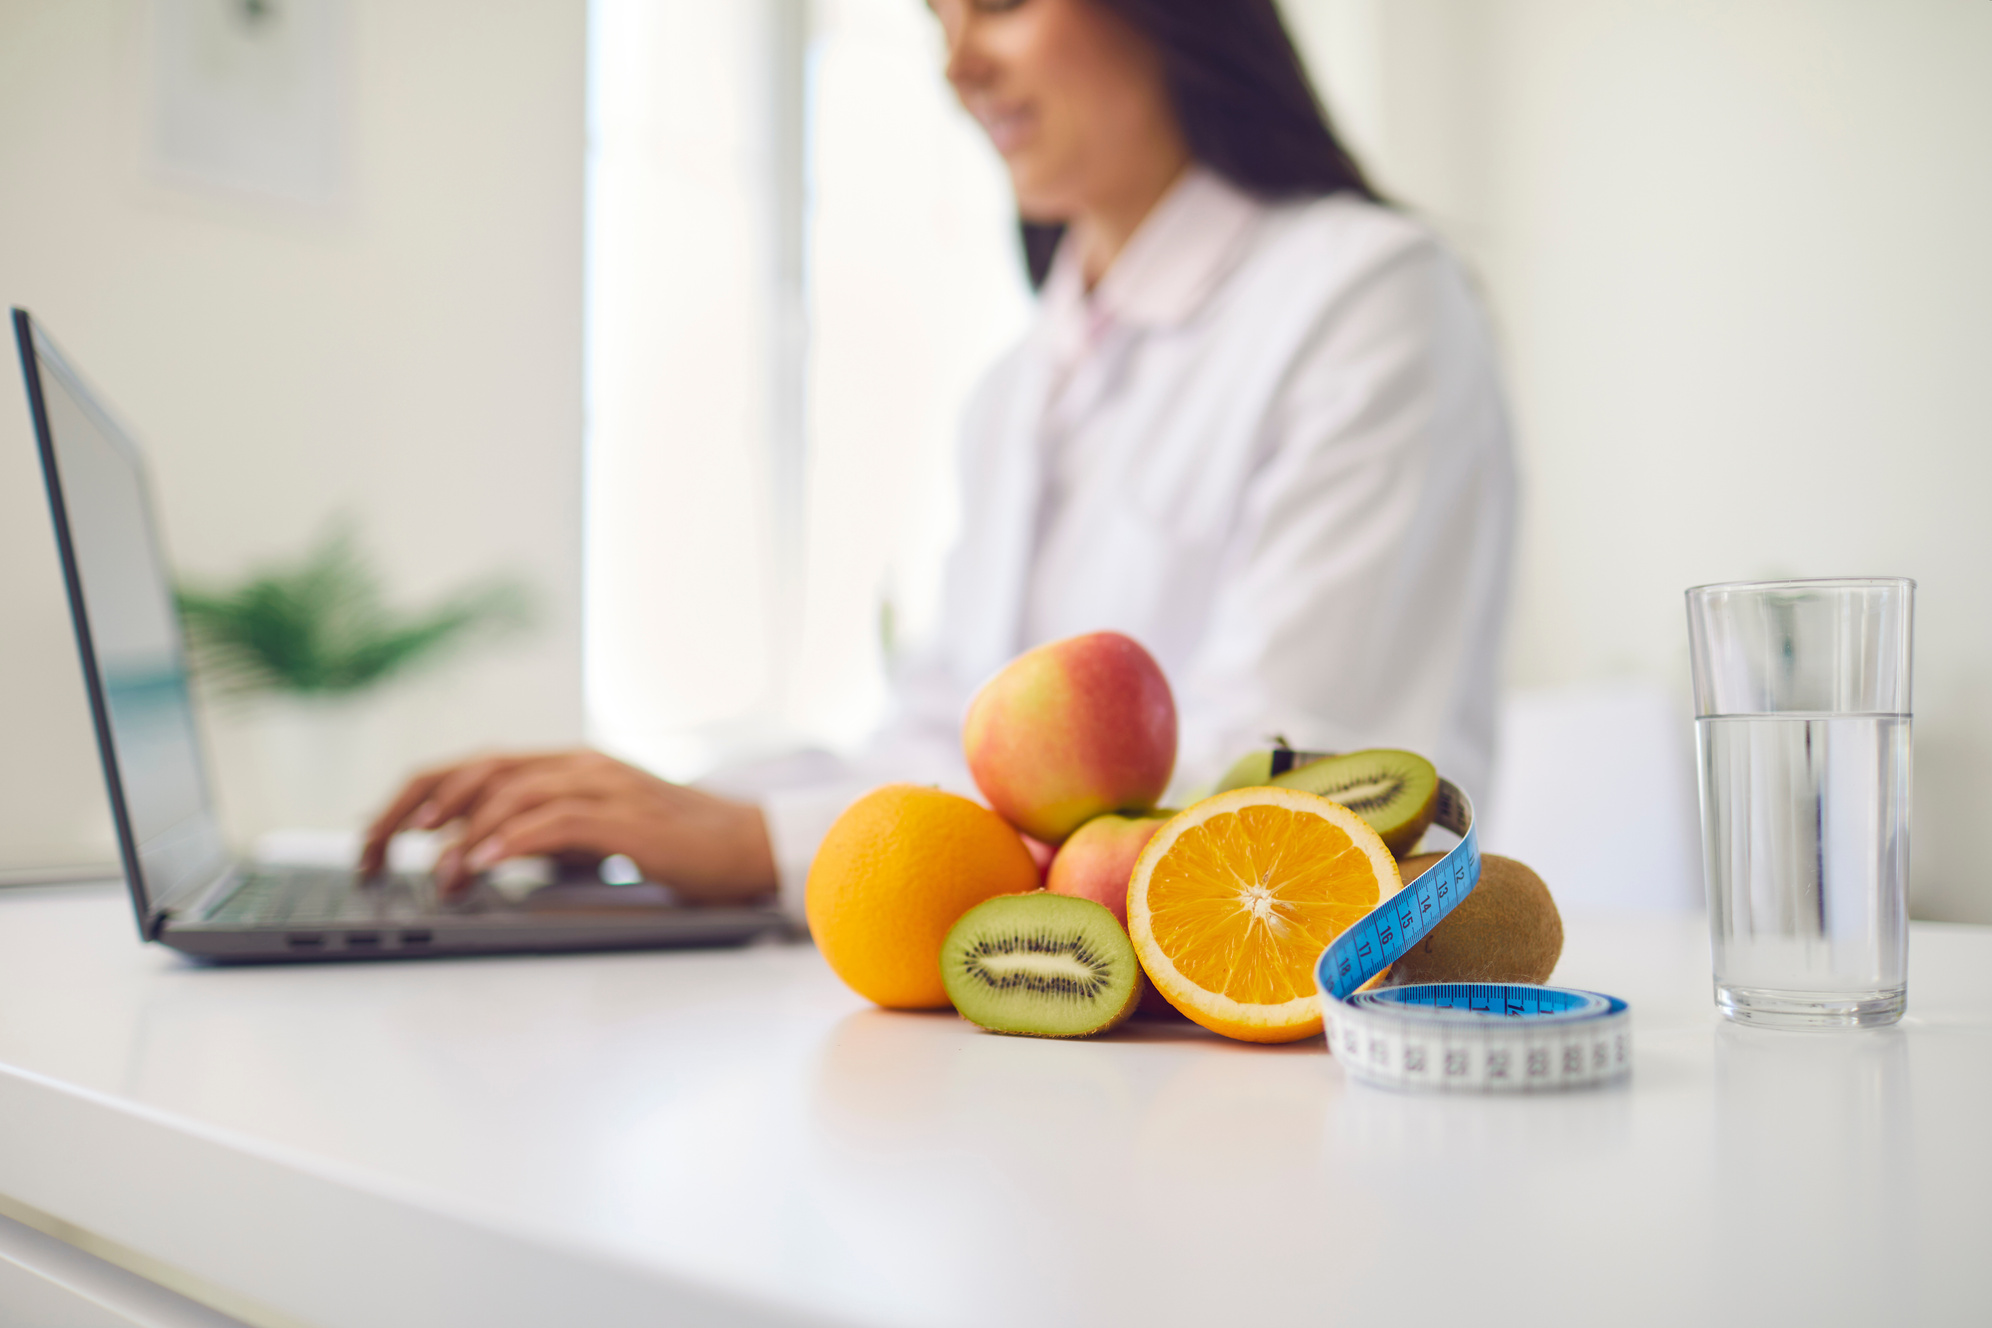 Fruit, Measuring Tape and Glass of Water Placed on Desk against Blurred Dietitian Working on Laptop